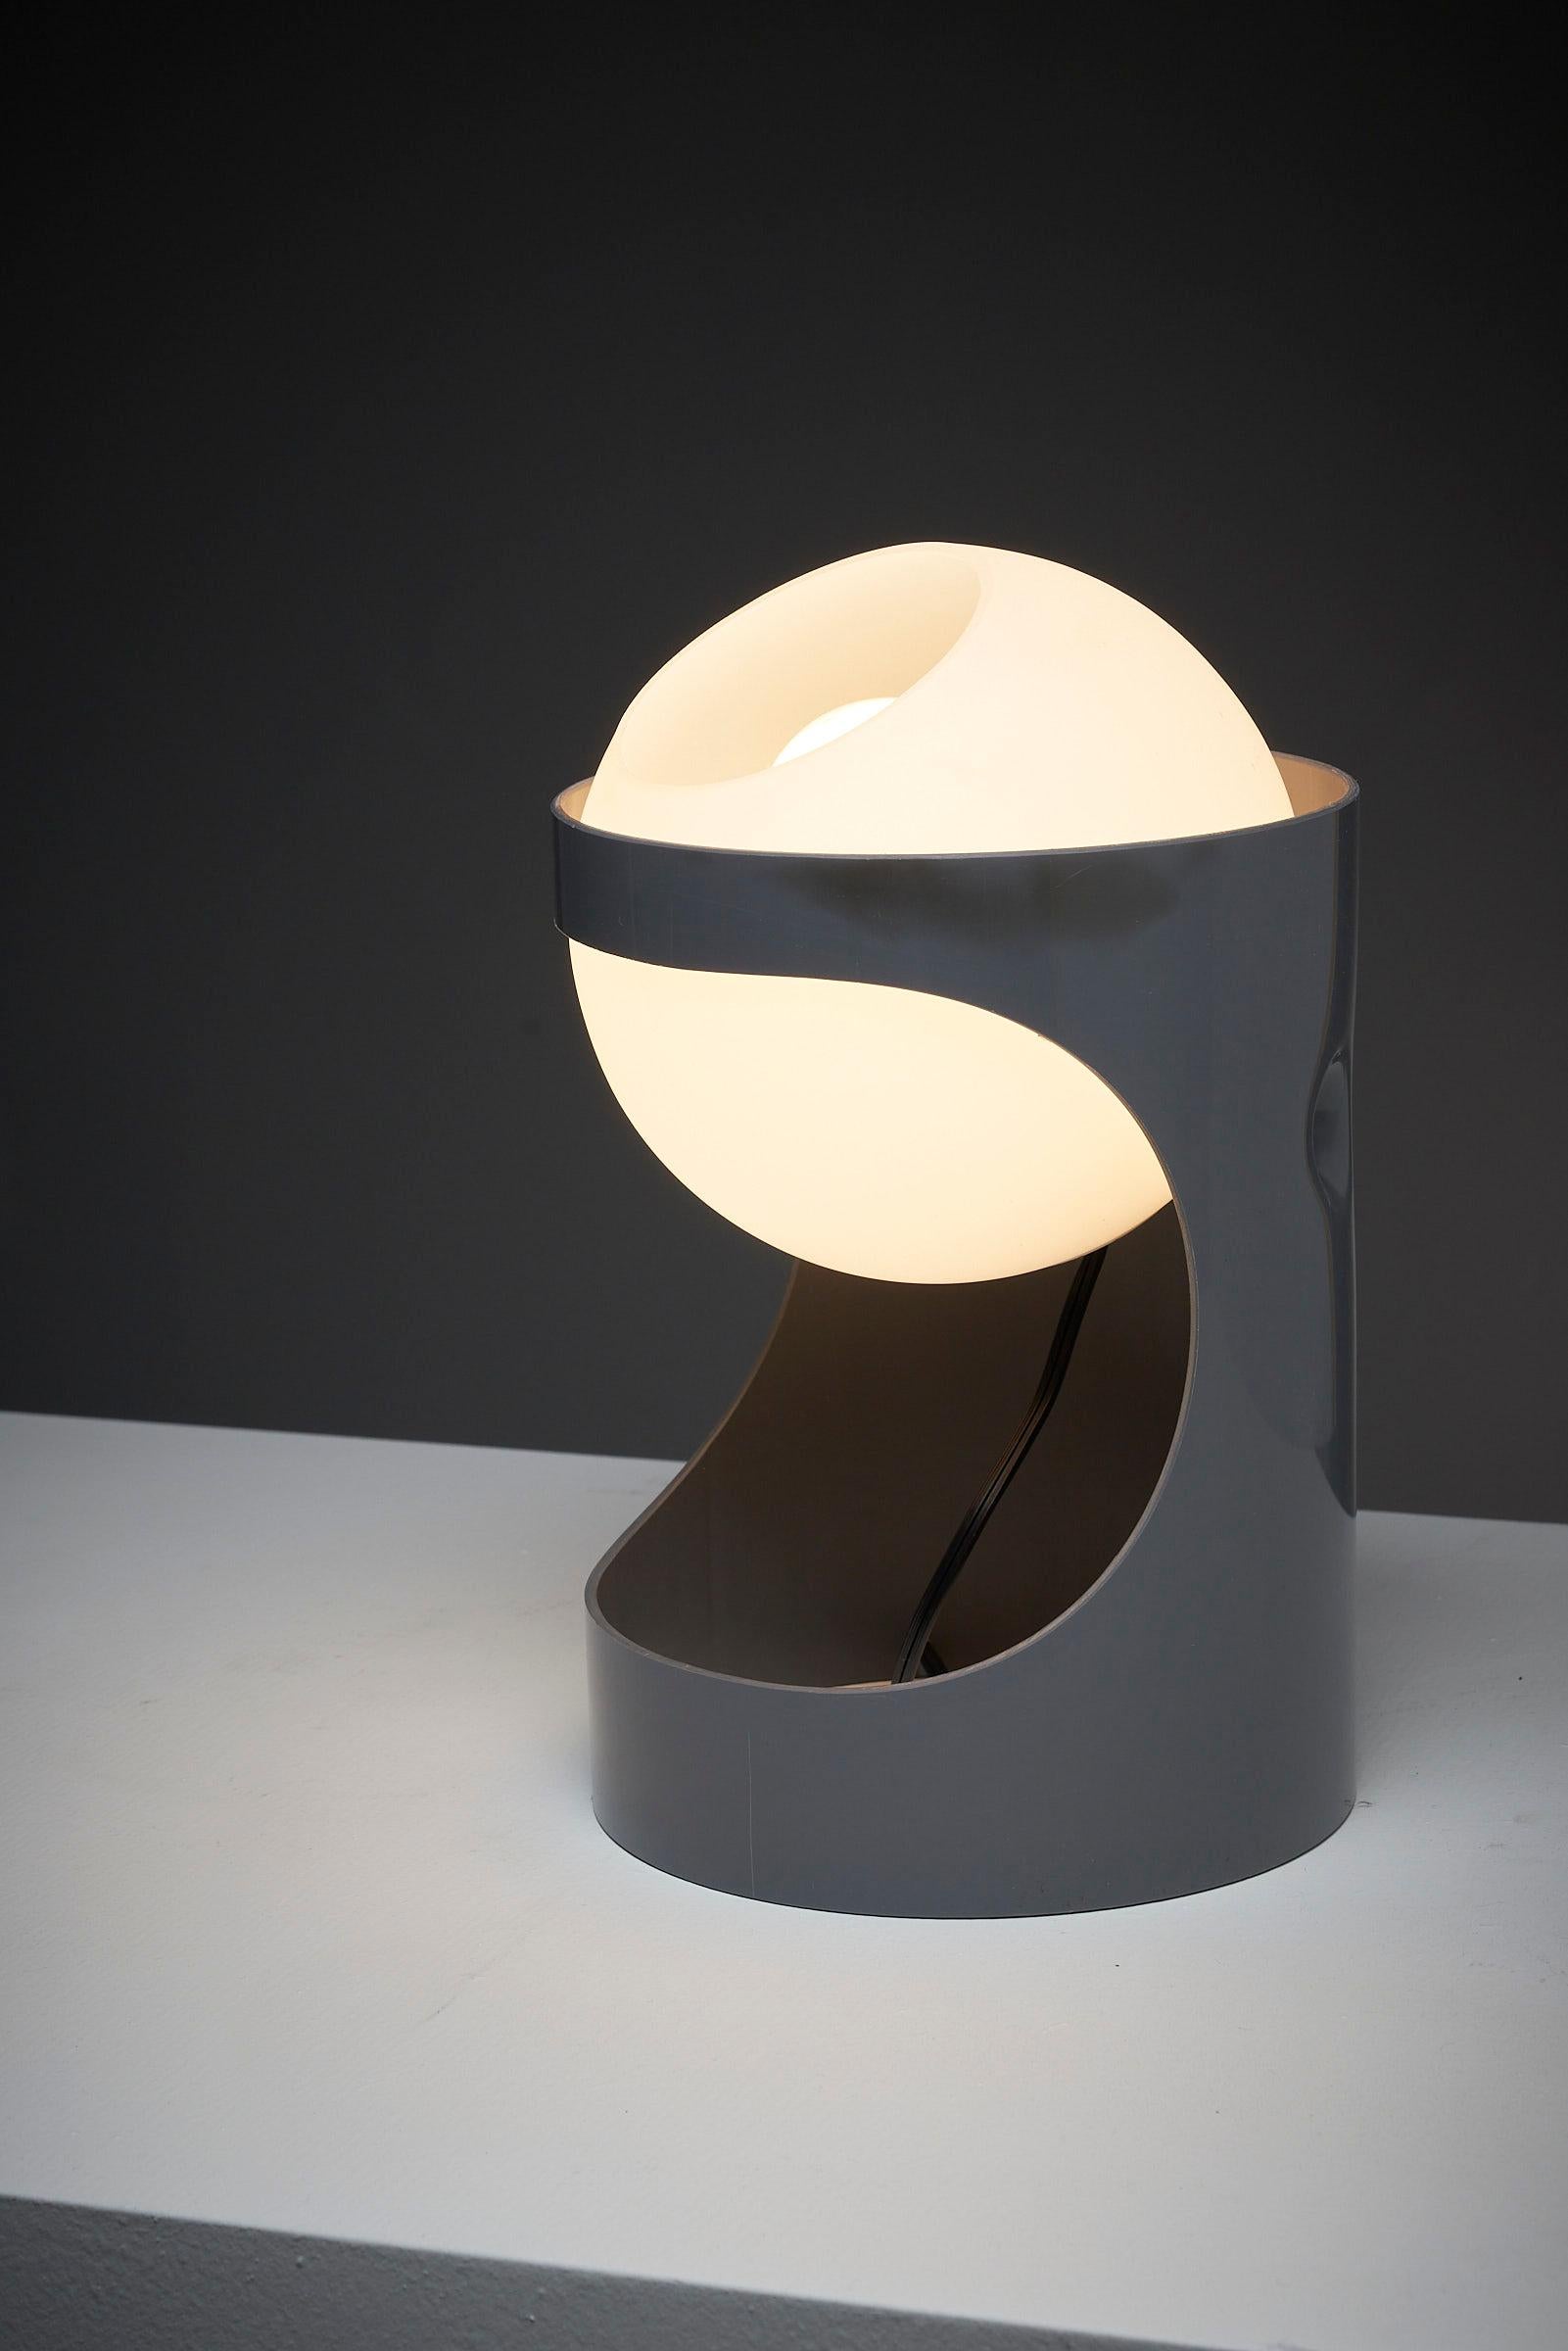 Swiss 'L1 Guggerli' Table Lamp By Rico and Rosemarie For Baltensweiler AG For Sale